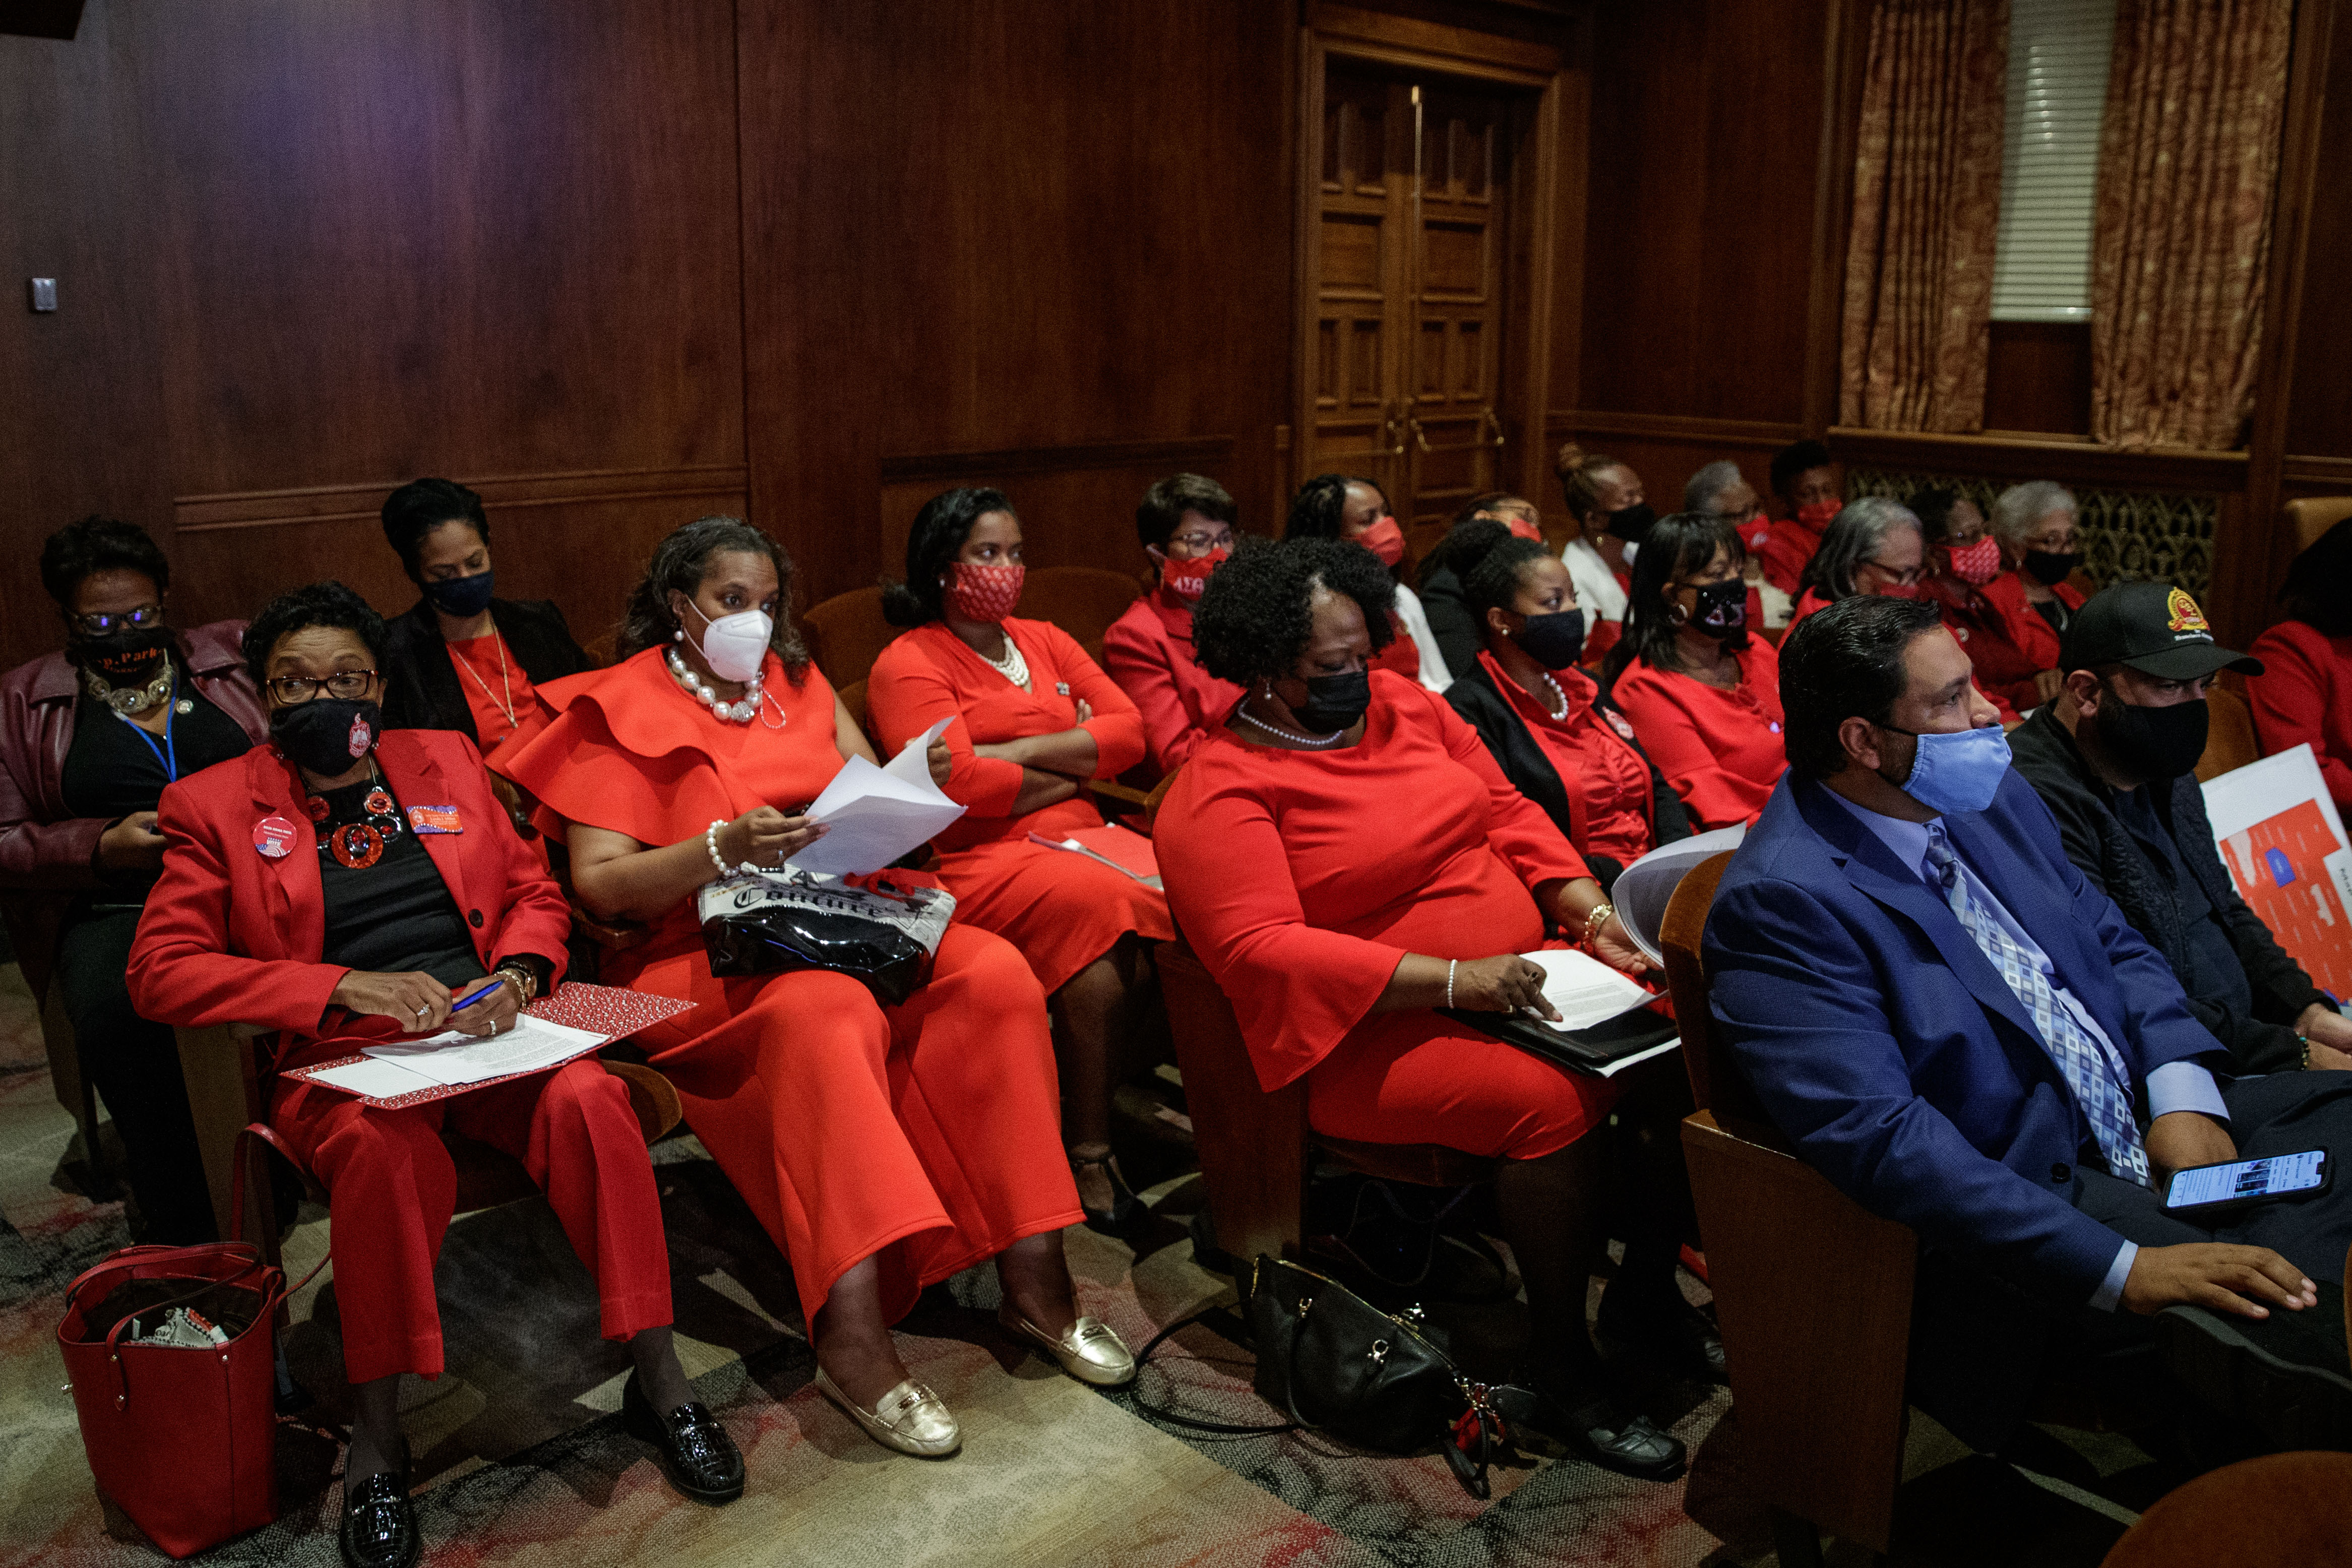 Members of the Delta Sigma Theta sorority attend a meeting in support of a member who testified before the Legislative Reapportionment Commission.